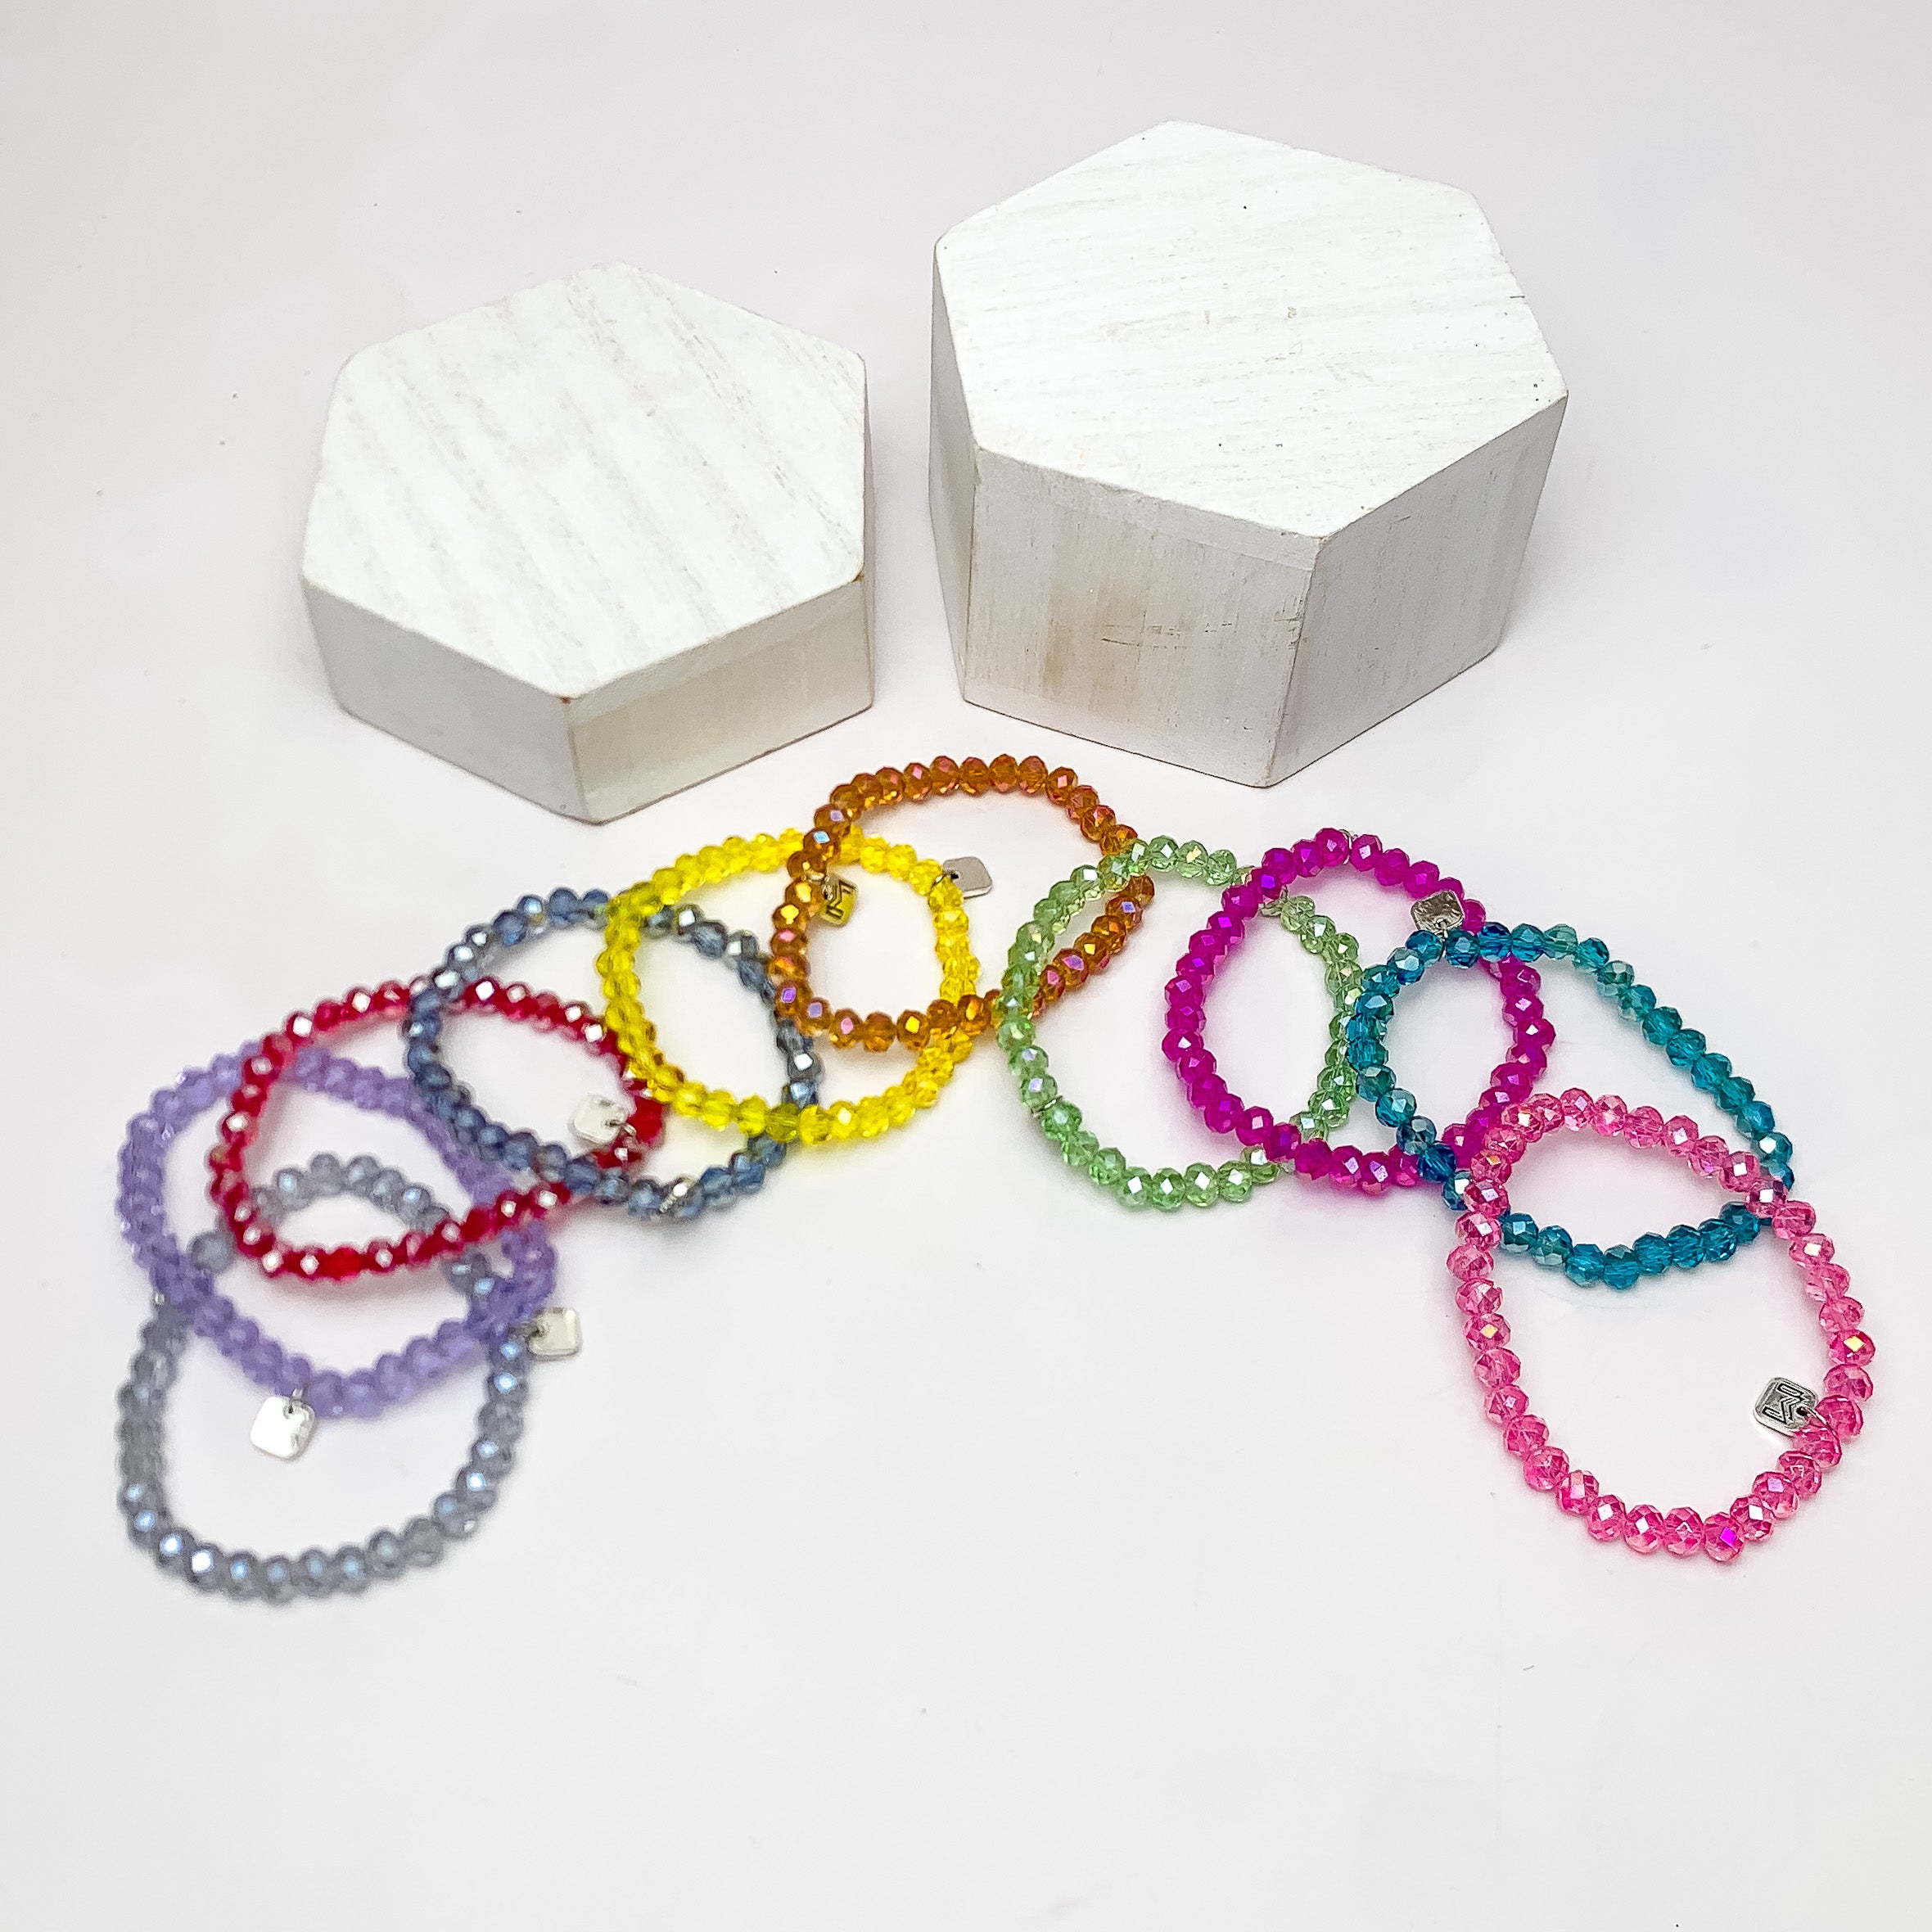 Set of Ten | Party Girl Crystal Beaded Bracelet Set in Light Multicolor. These bracelets are pictured on a white background with two white podiums behind the bracelets.